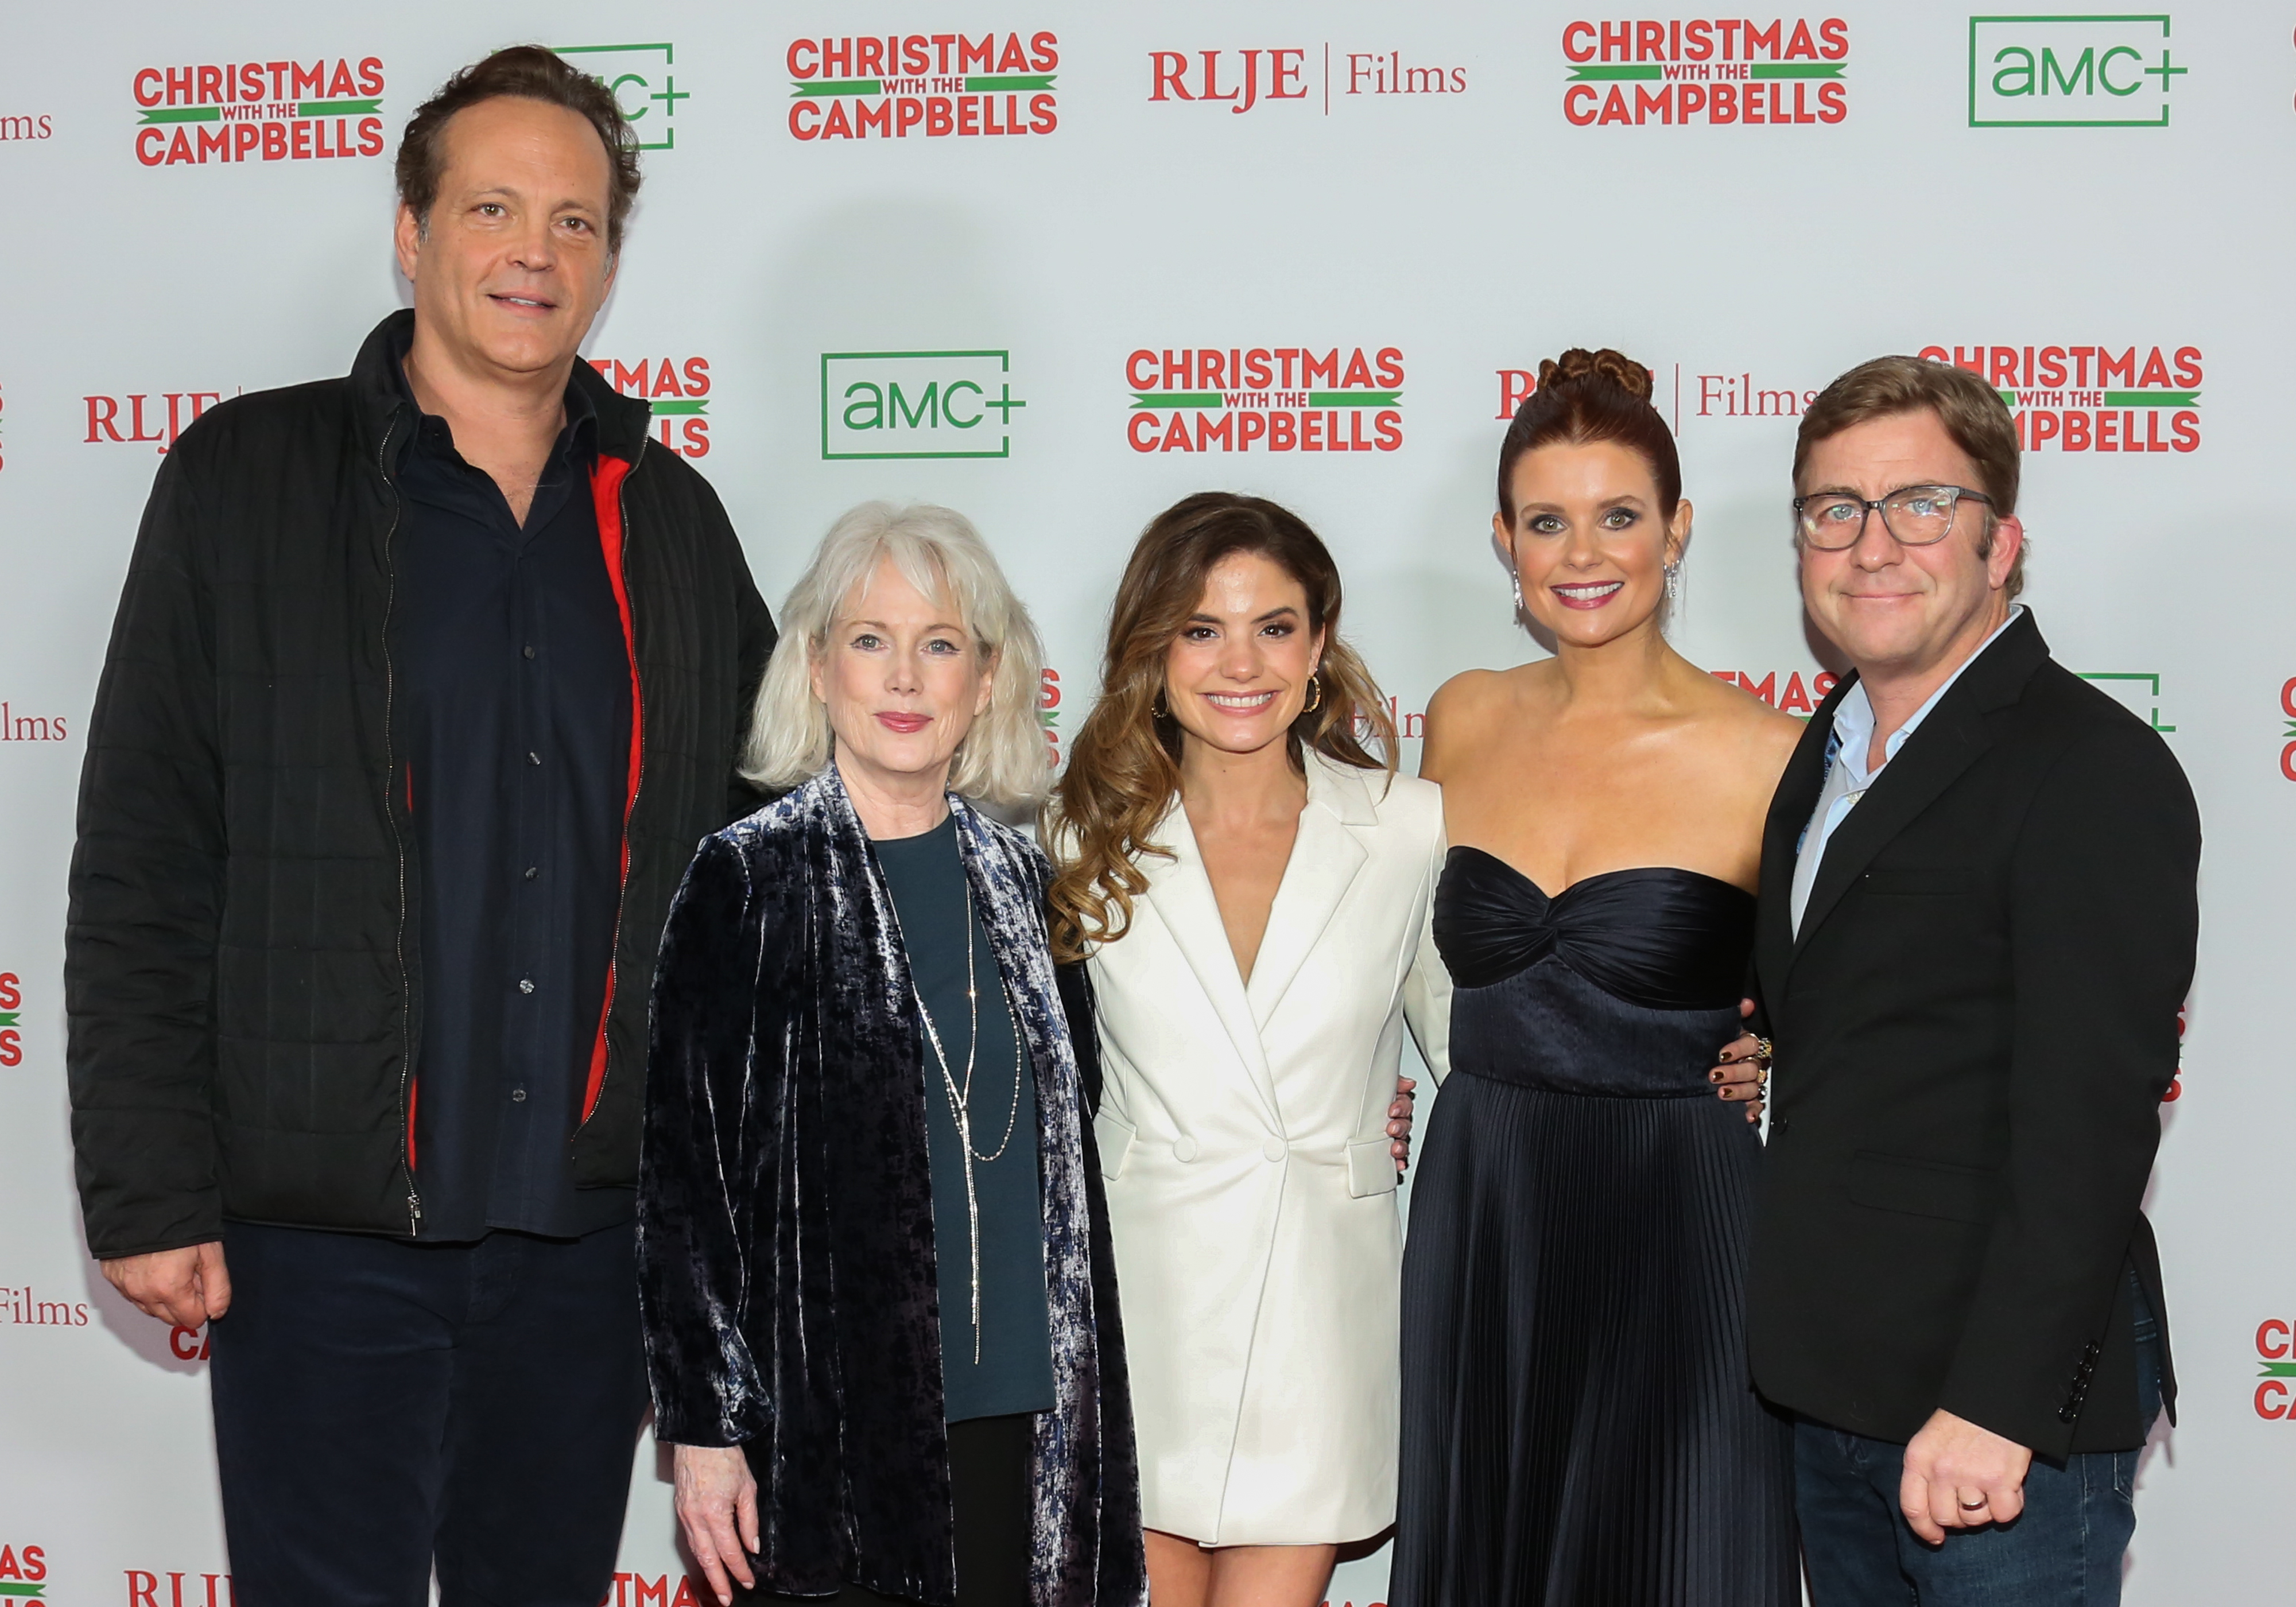 The cast of &quot;Christmas with the Campbells&quot;